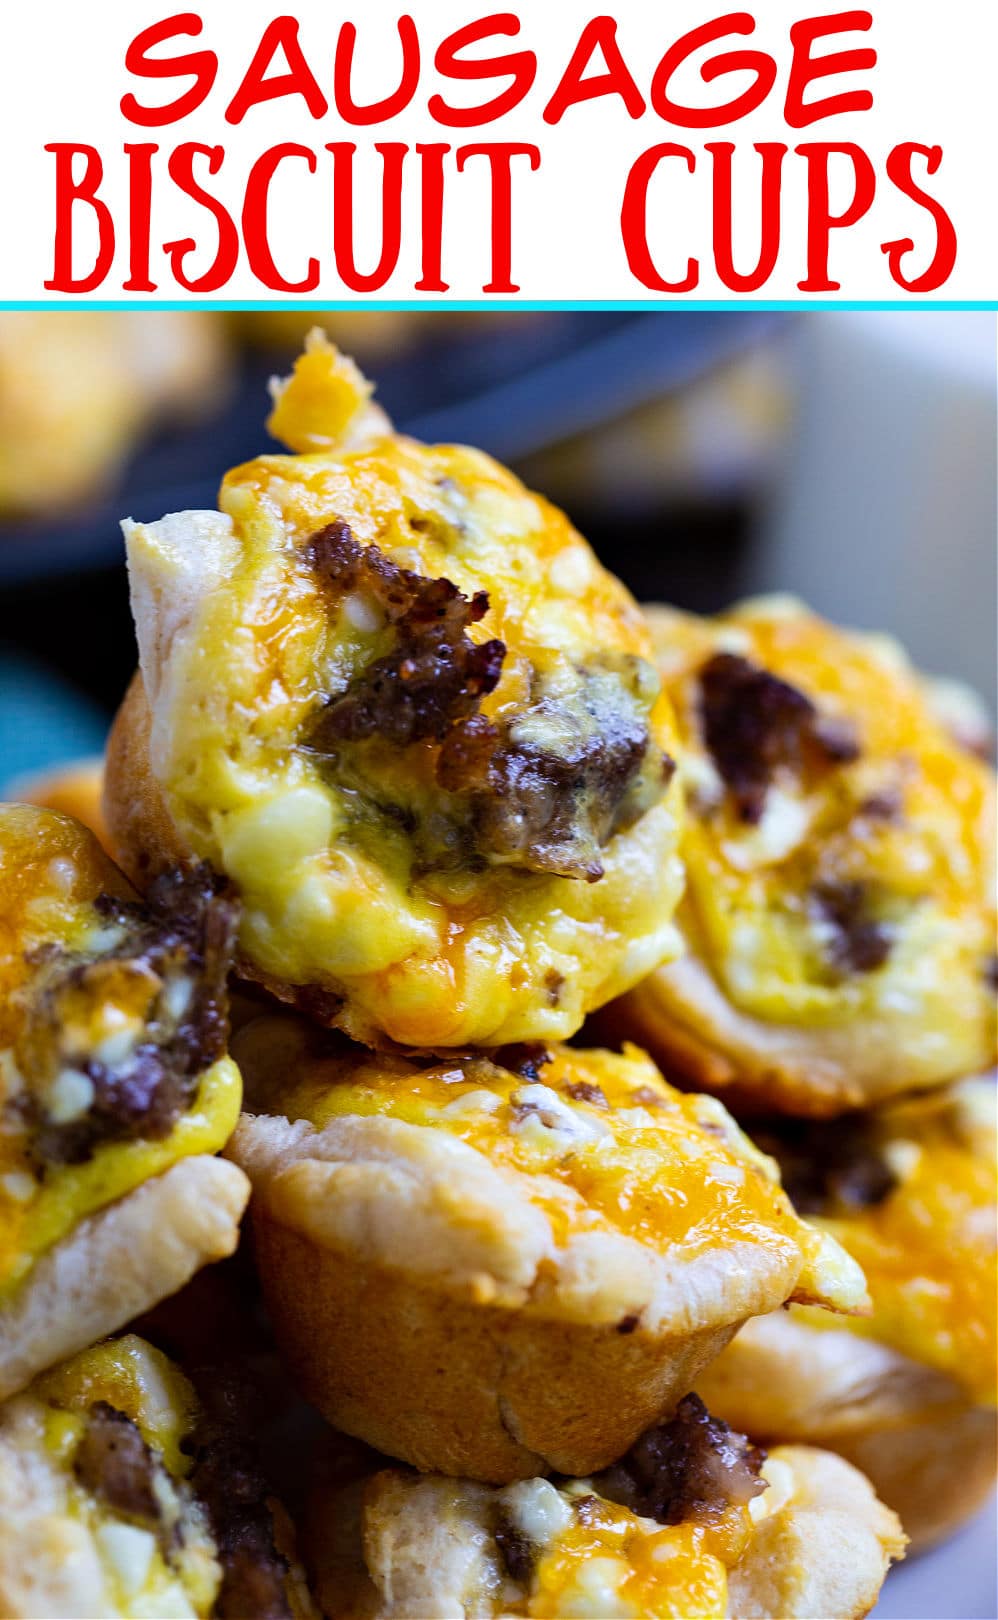 Mini Sausage Biscuit Cups stacked on top of each other.